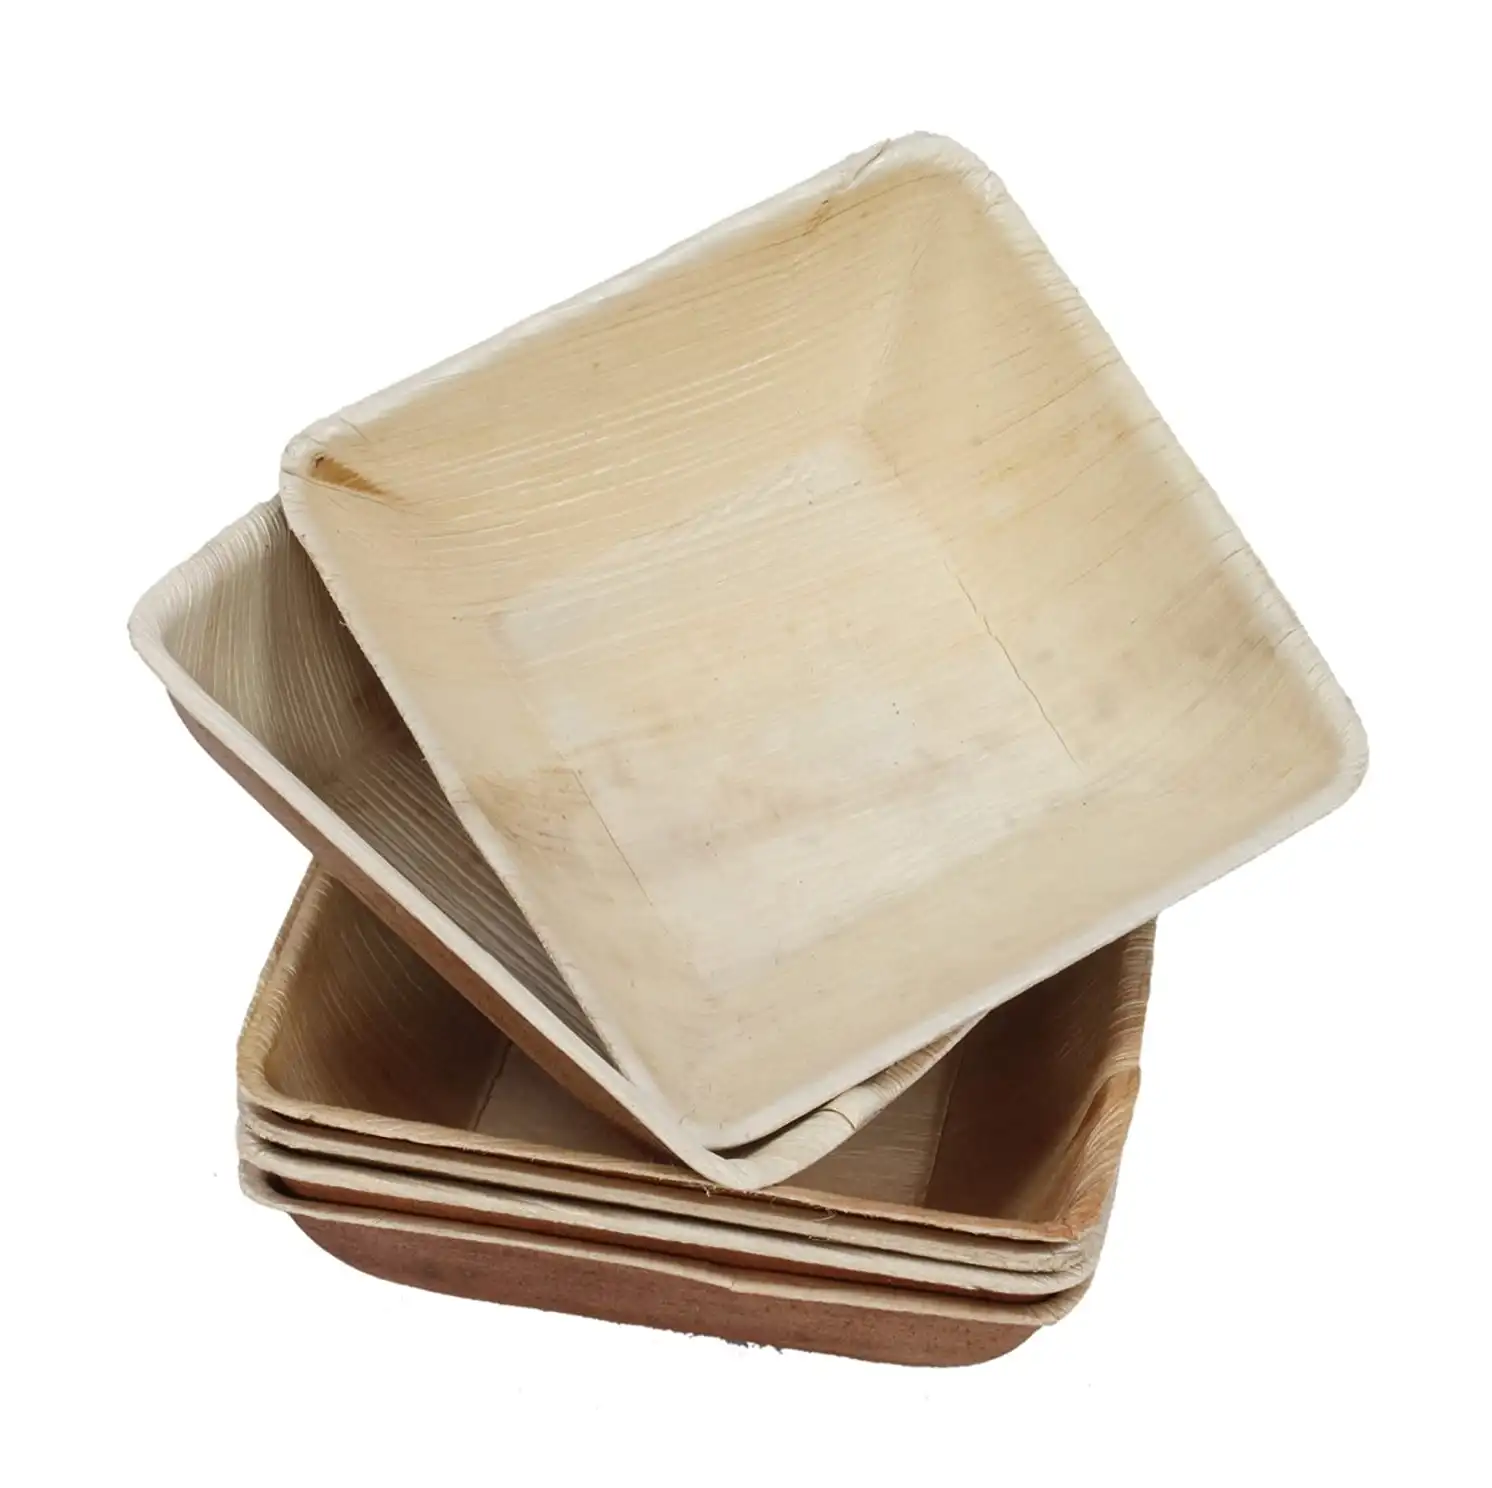 Sushi Food Serving Dish Plates Dessert Tray Fast Food Dish Areca Palm Leaf Plates for Catering Restaurant BBQ from Manufacturer